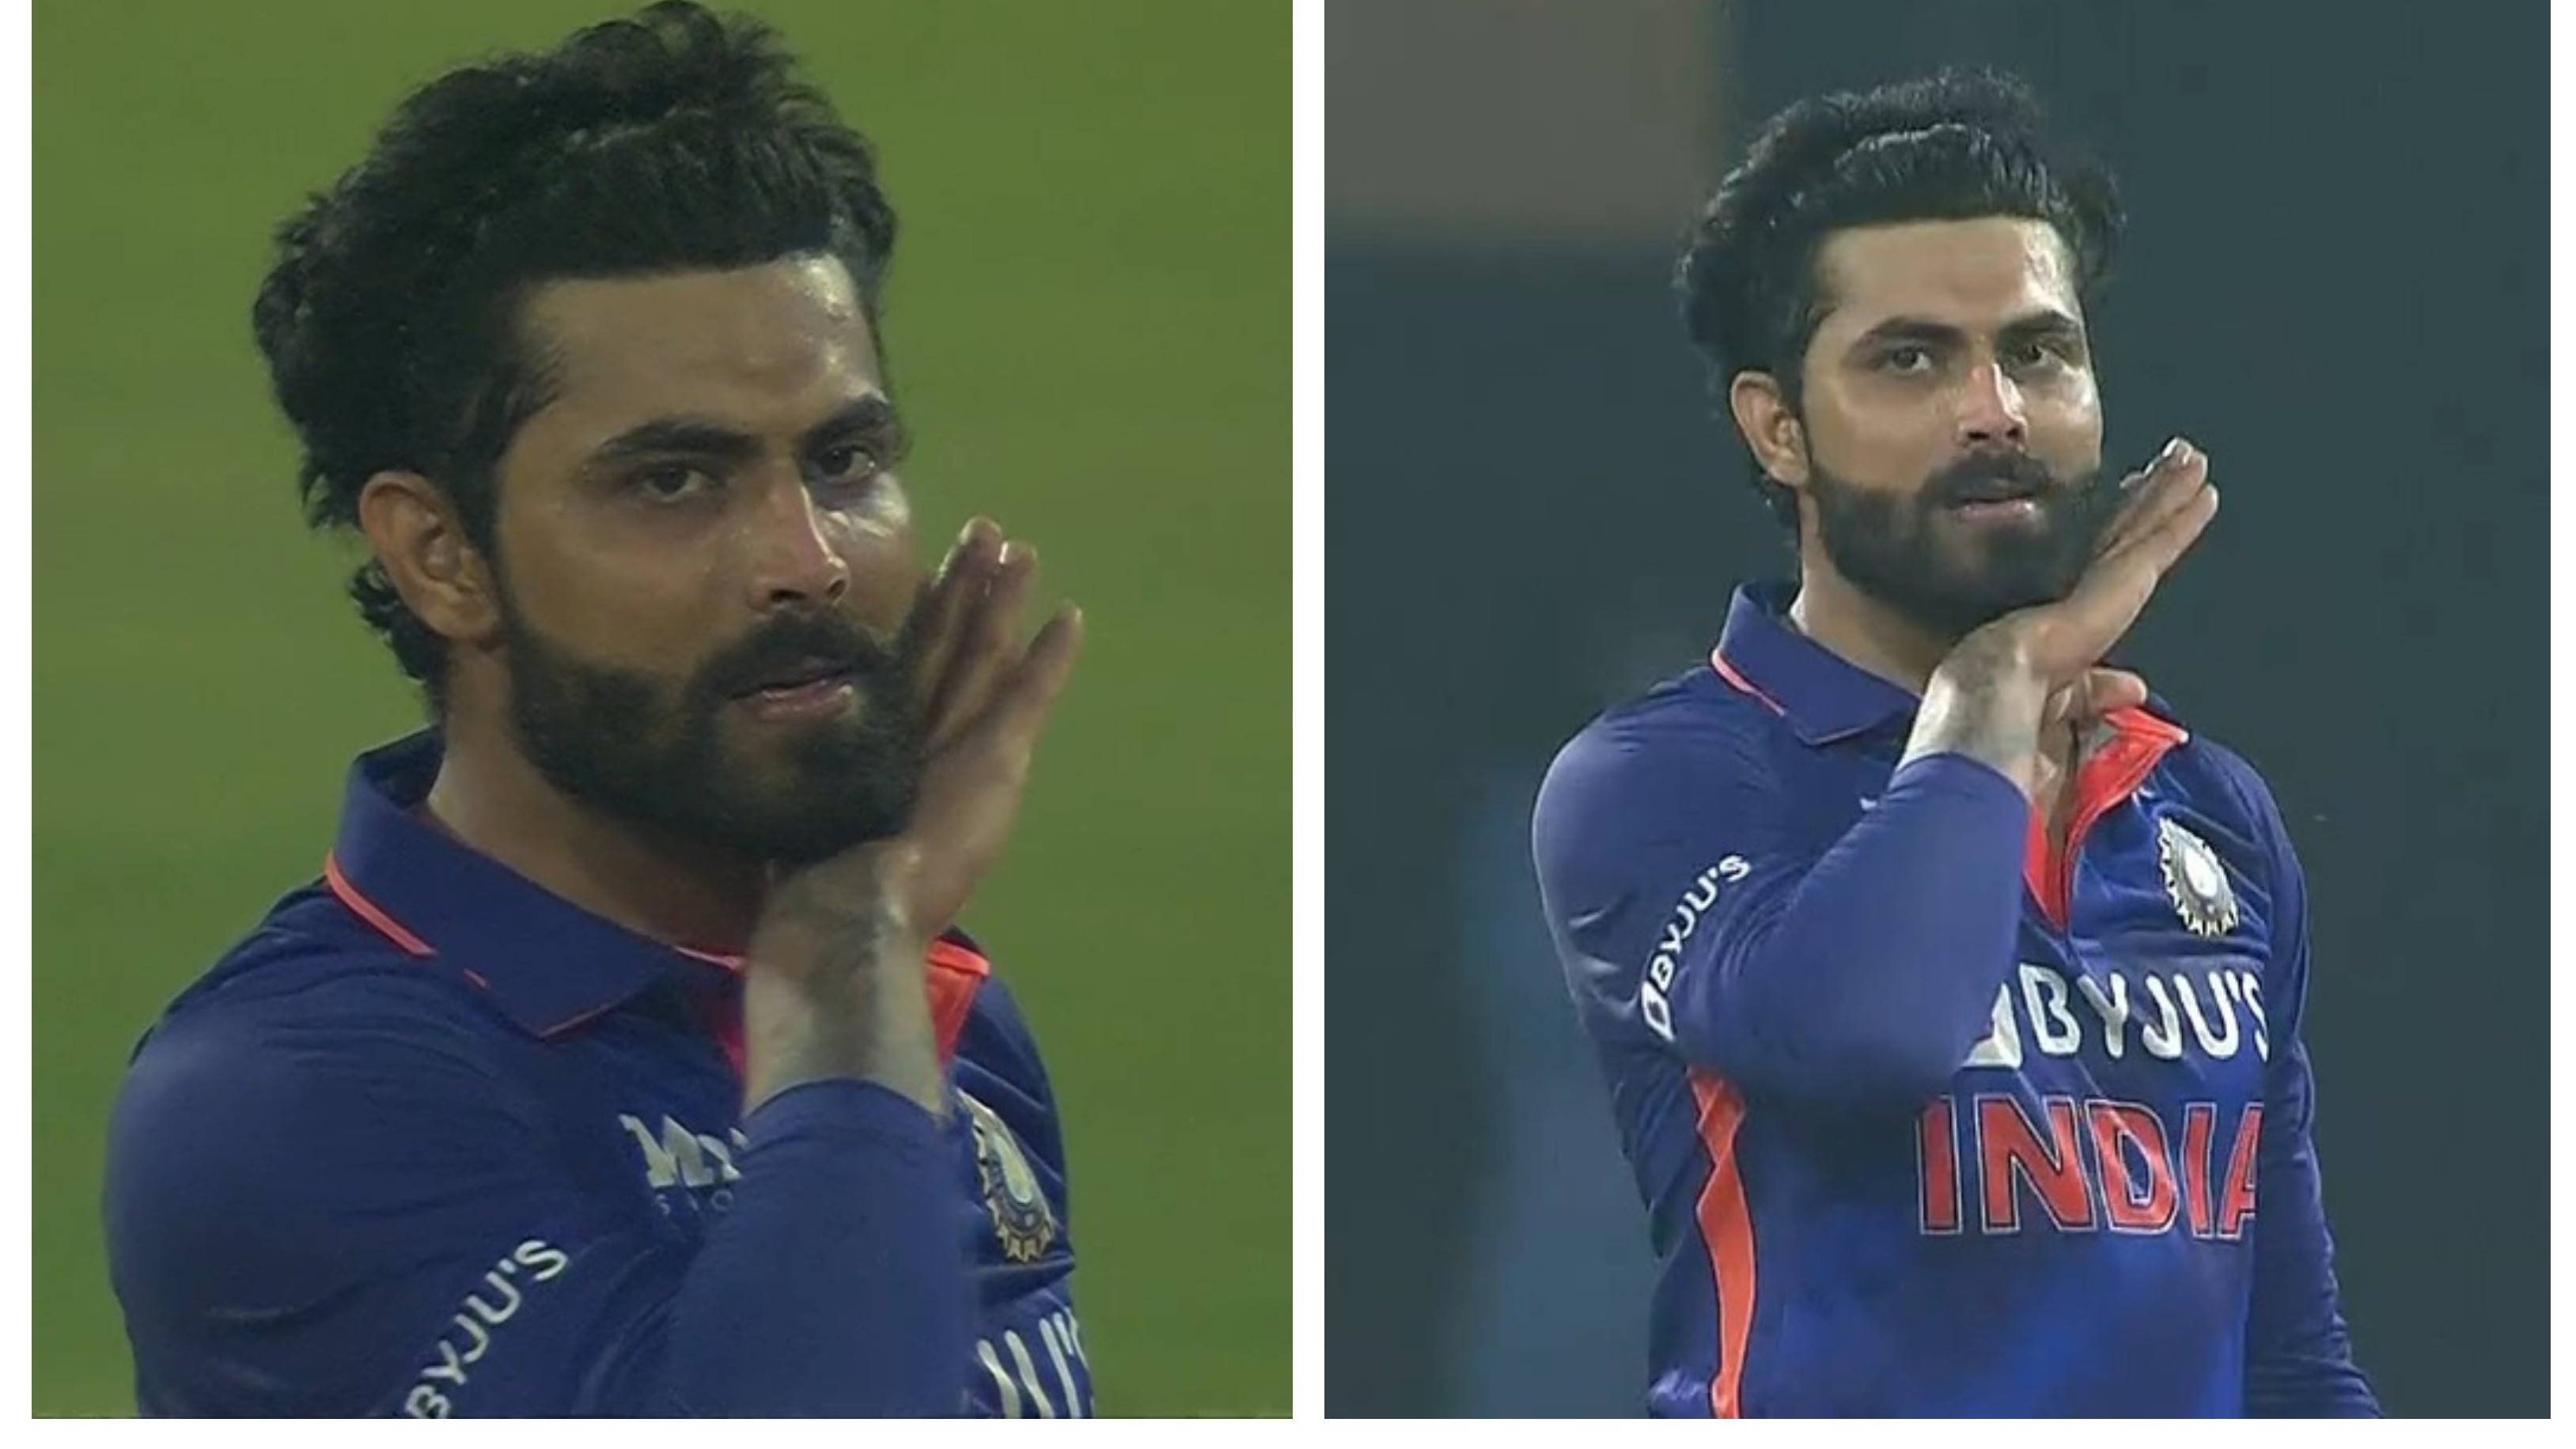 IND v SL 2022: WATCH – Jadeja celebrates Chandimal’s wicket with ‘Thaggedhe Le’ gesture from Pushpa movie